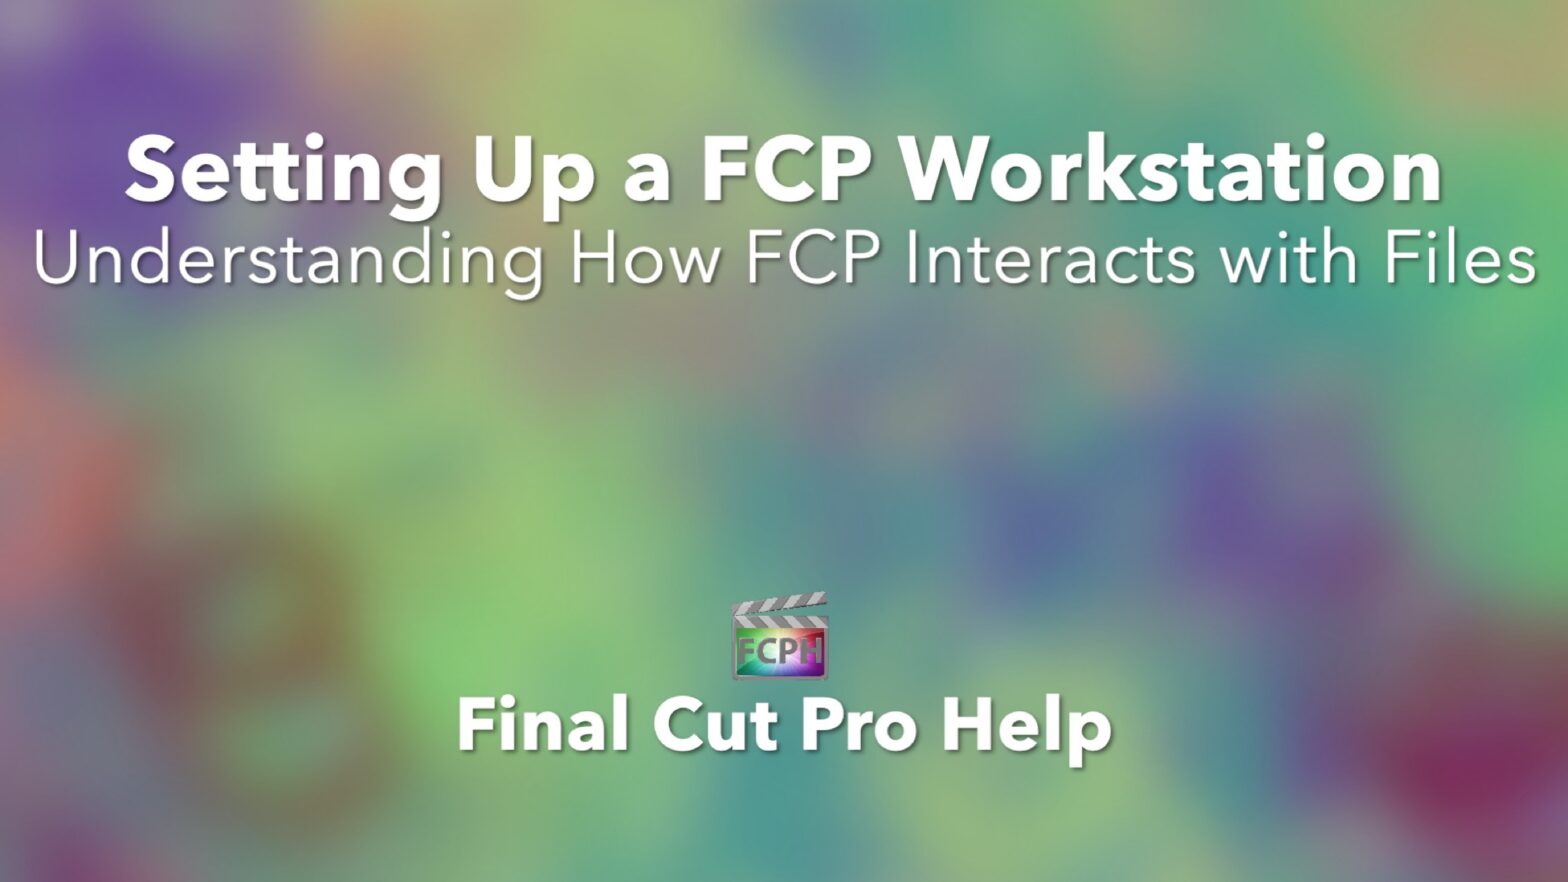 How Final Cut Pro Interacts with Files